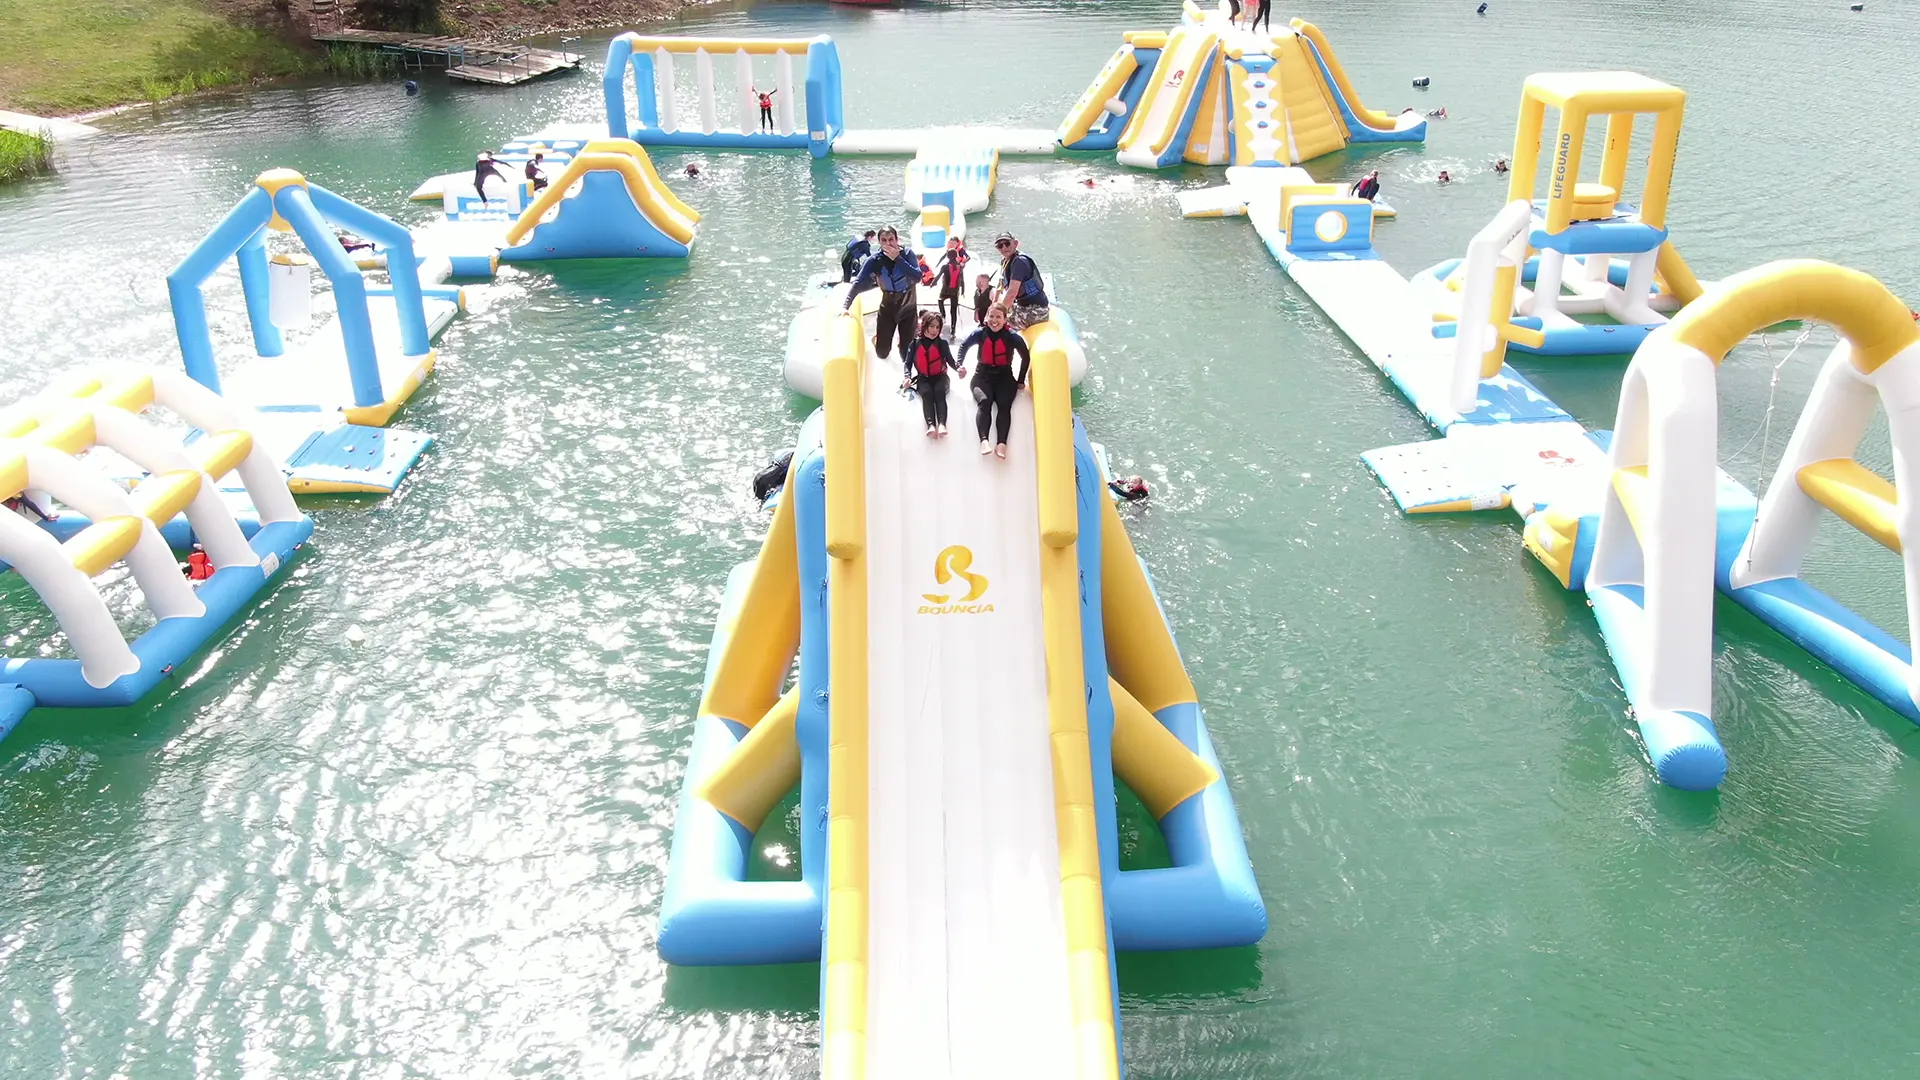 A group of aquapark users at the top of the slide